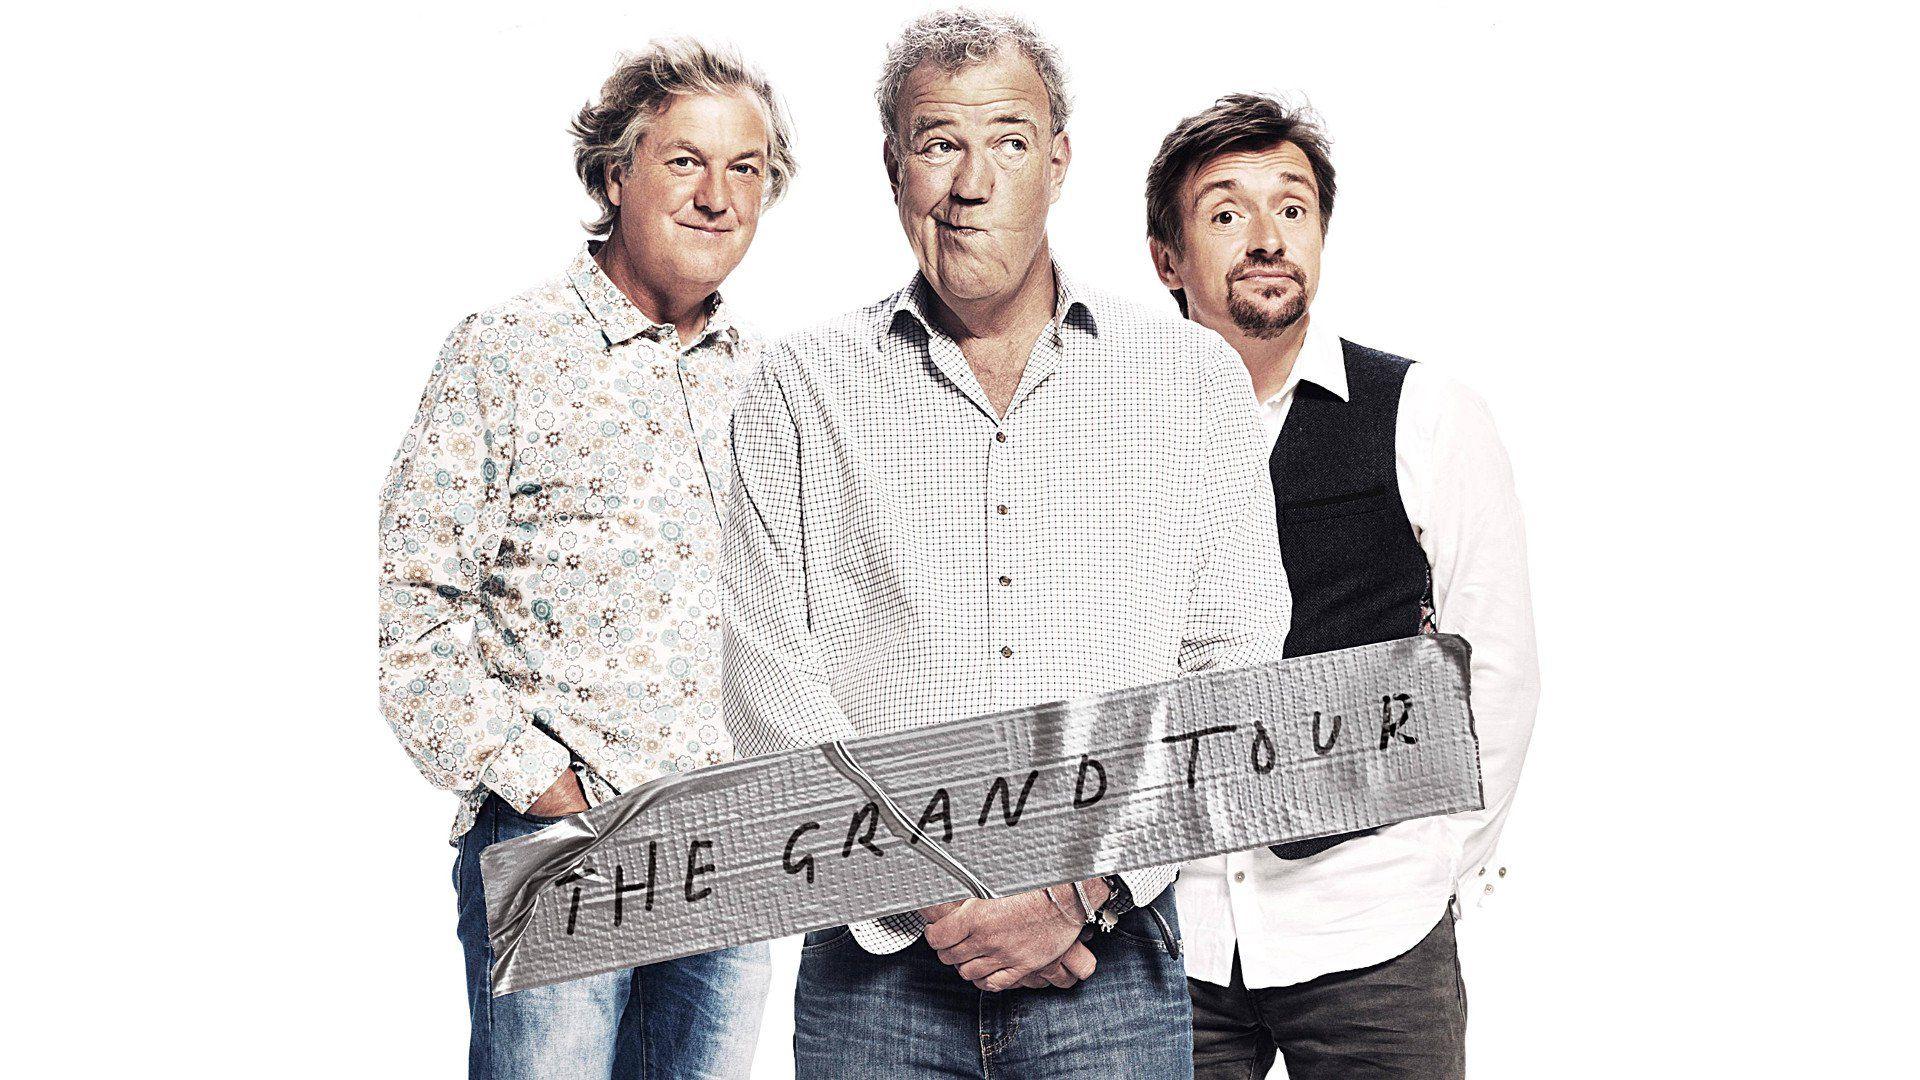 How To Watch The Grand Tour (AKA Top Gear 2.0) In Australia